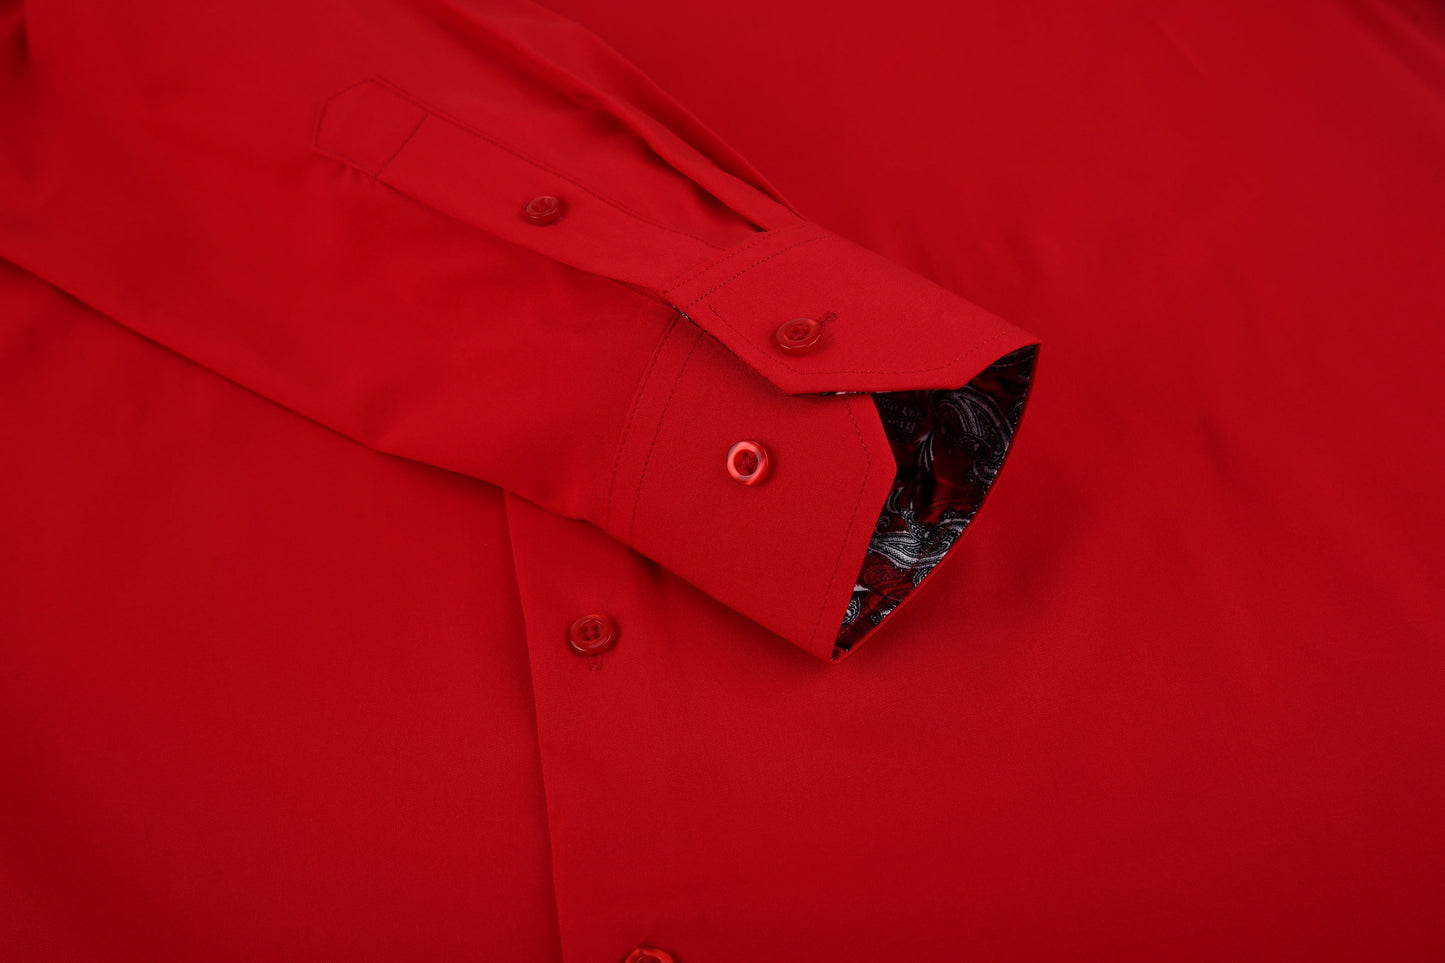 PREMIERE SHIRTS: RED OPULENCE